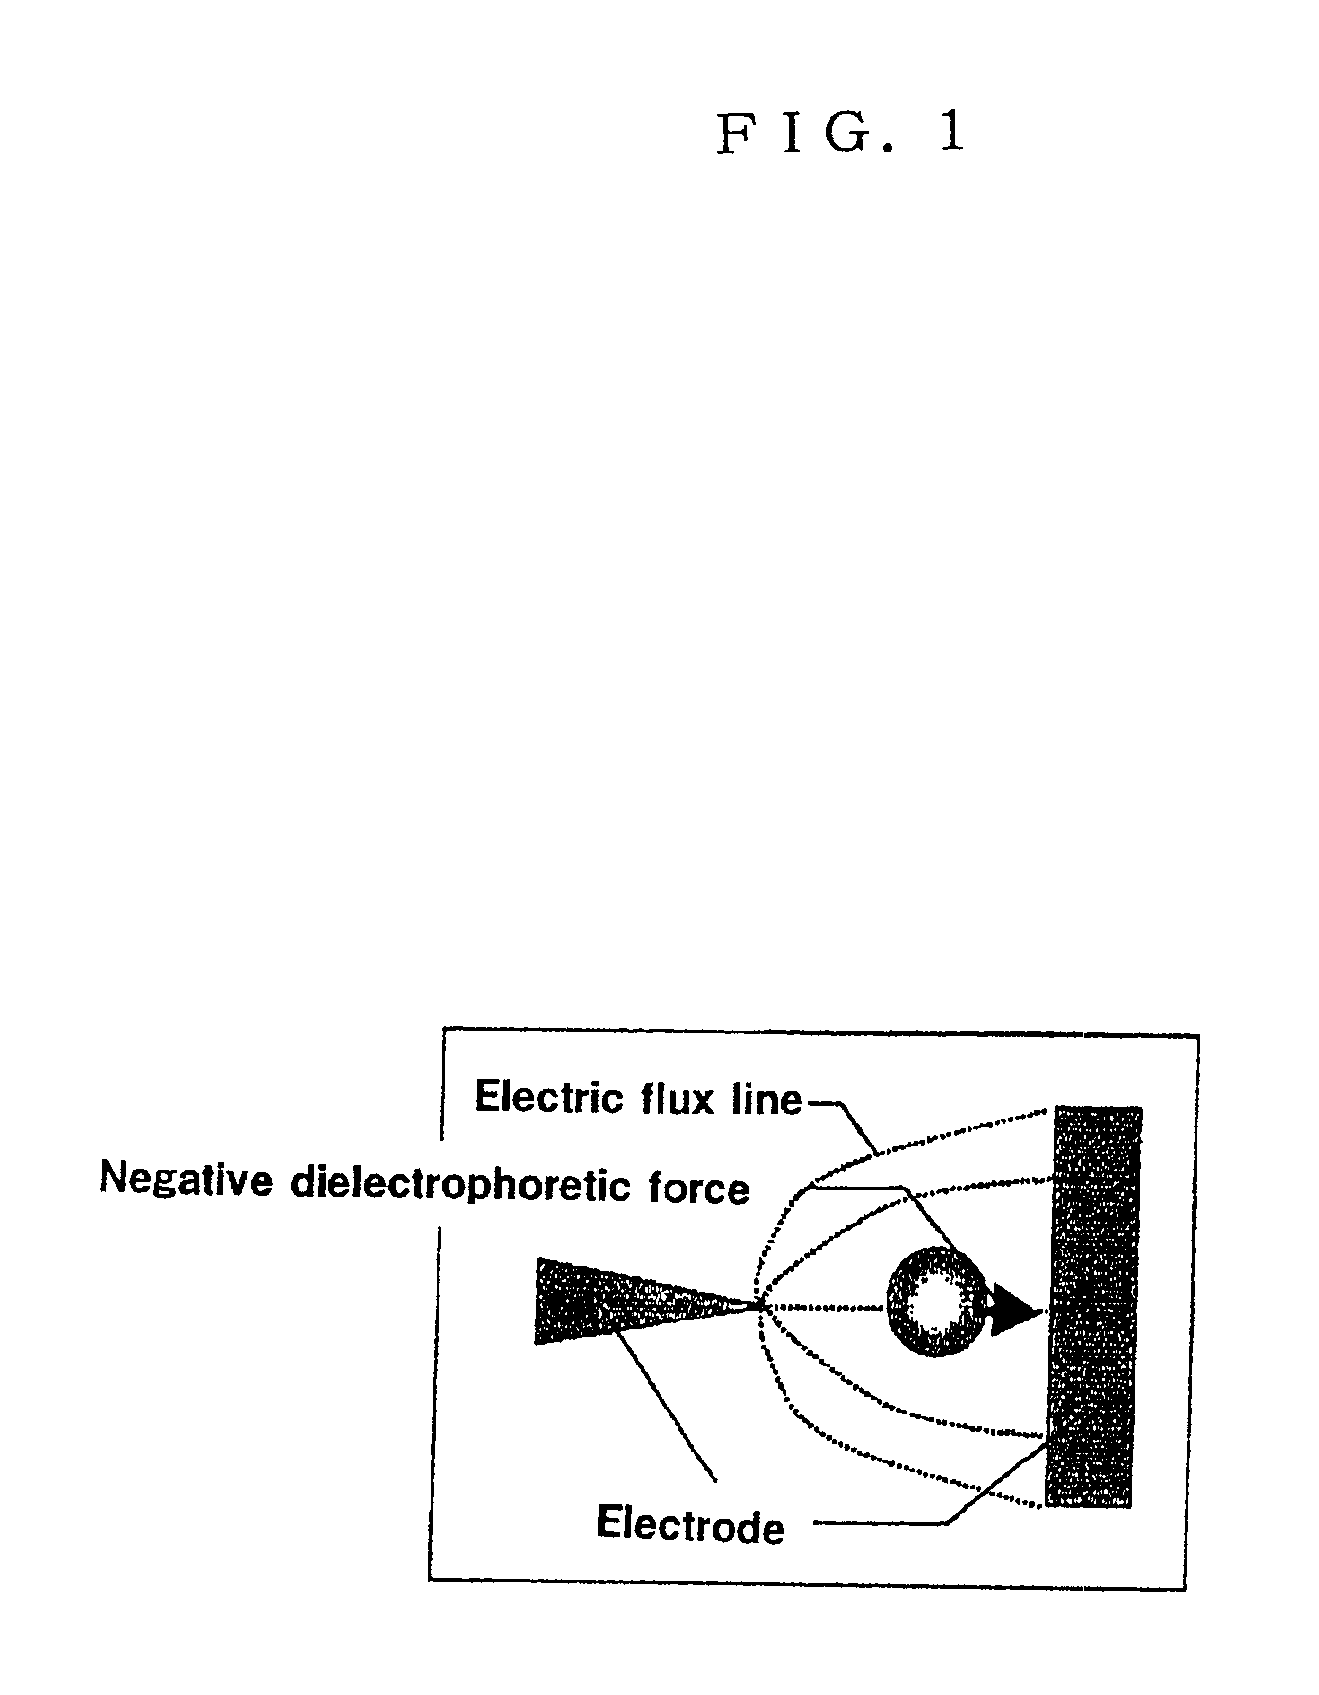 Method for separating substances using a dielectrophoretic apparatus